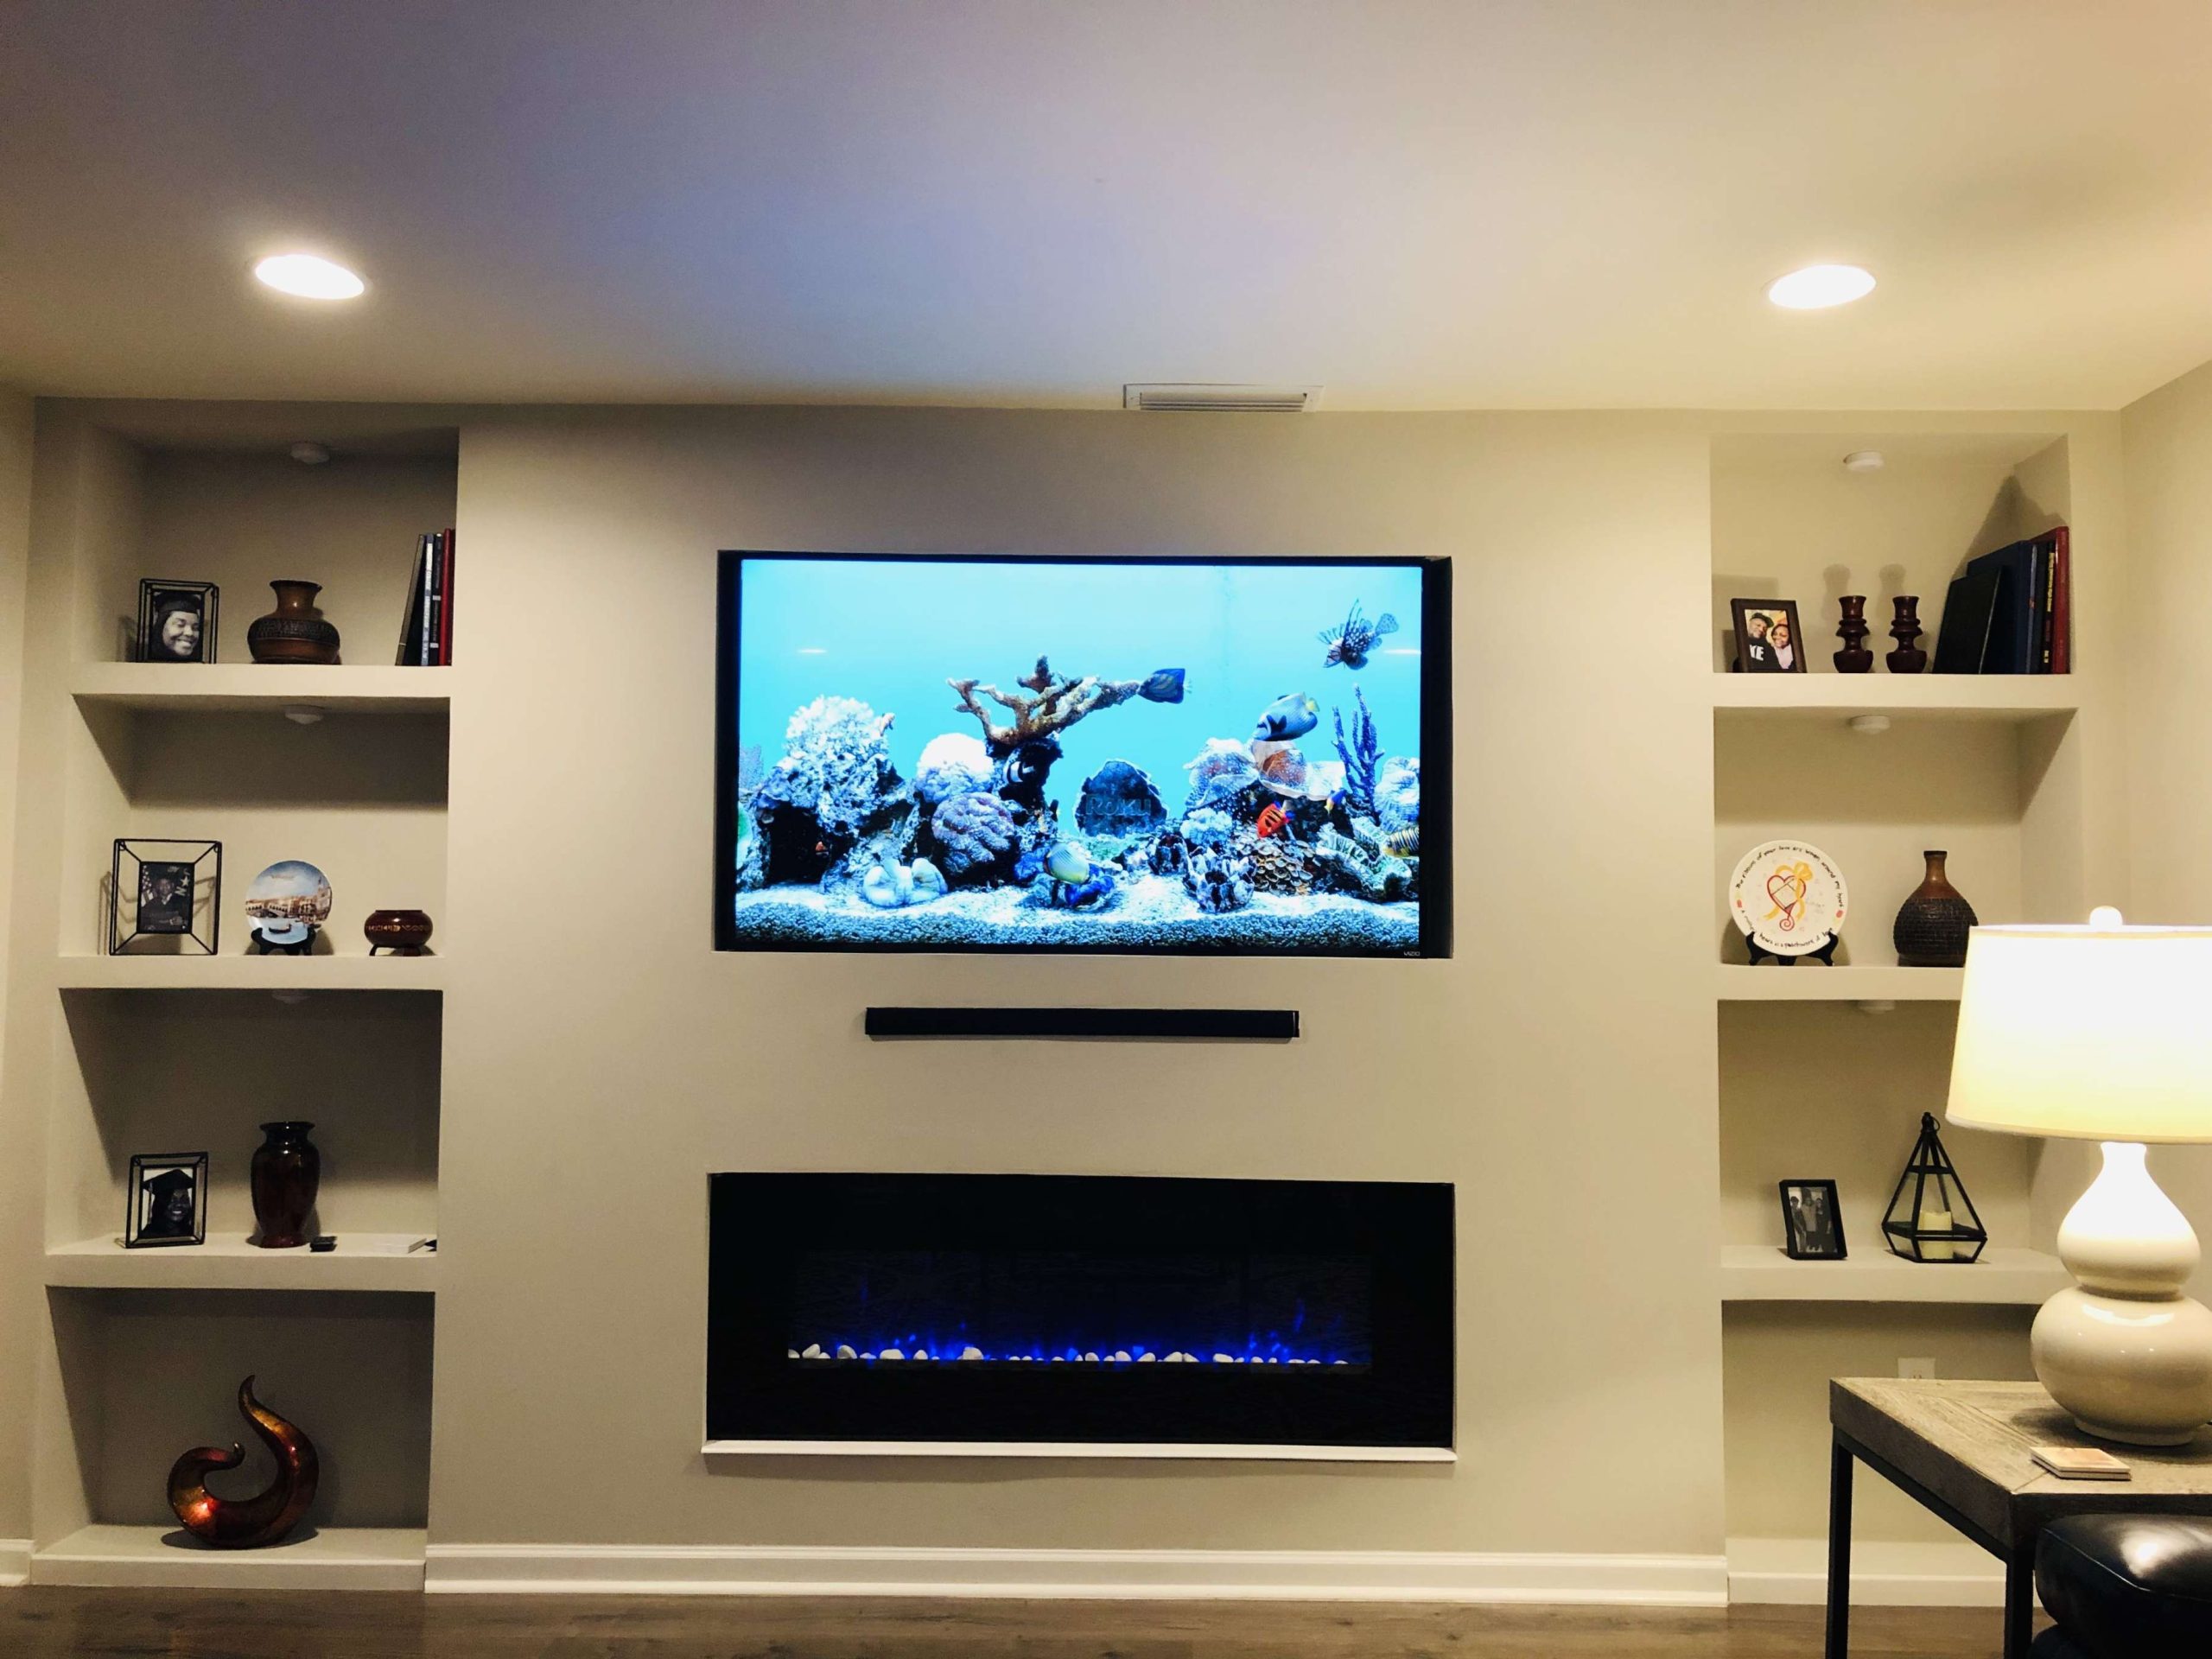 Love this look of my new built in wall unit with TV over fireplace